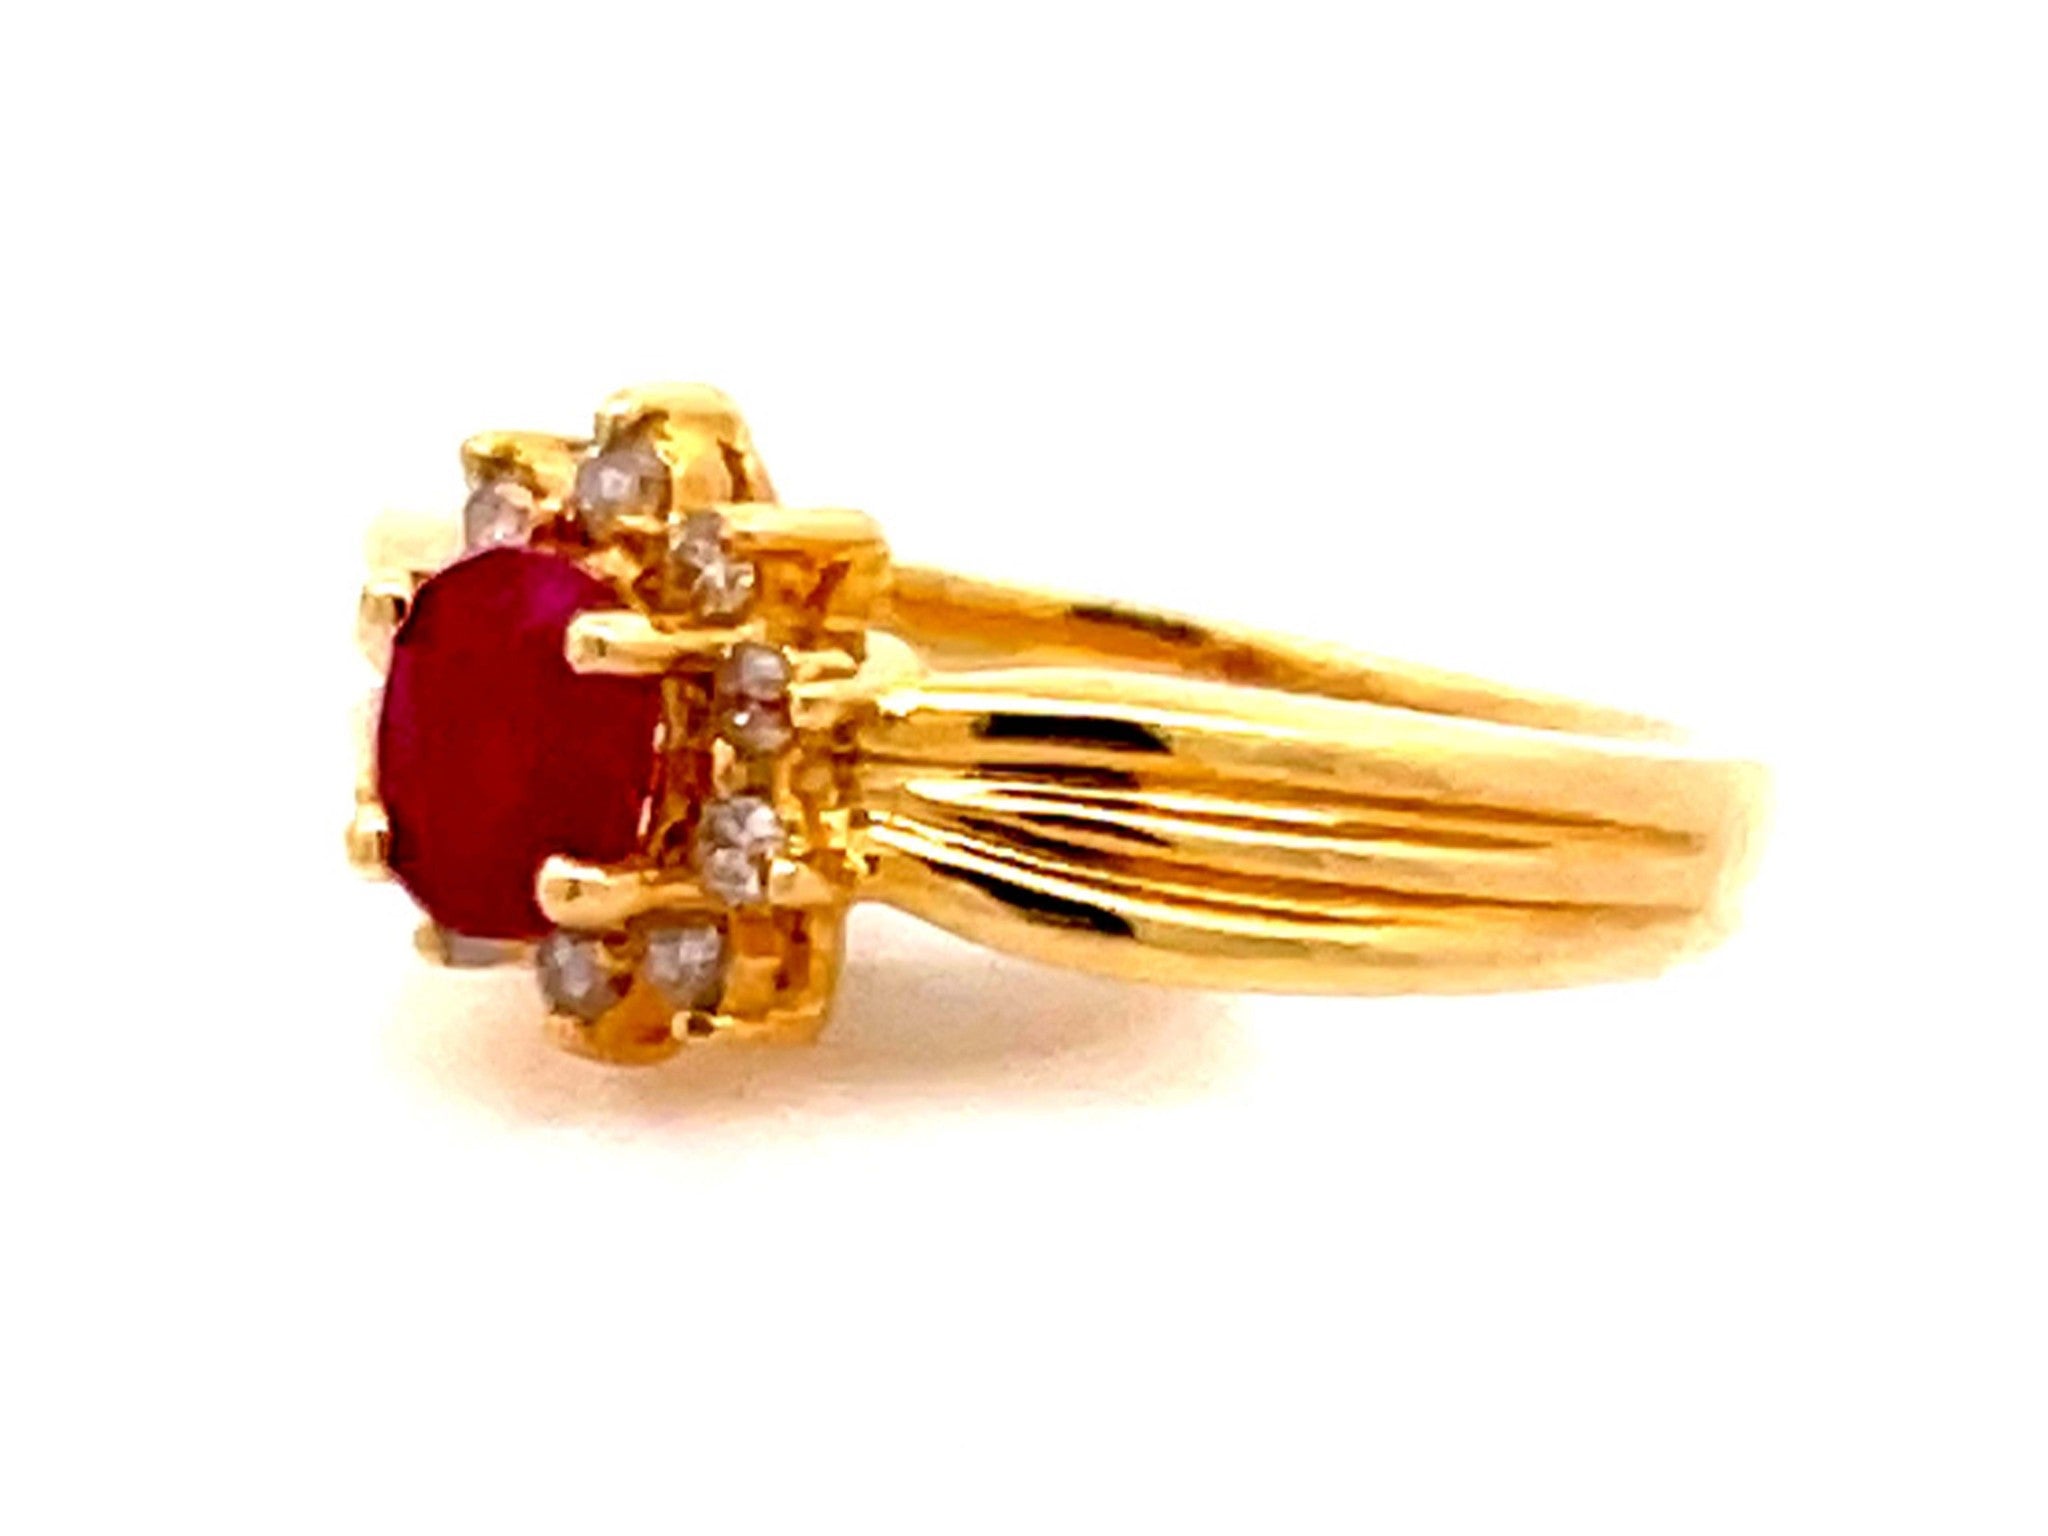 Vintage Ruby and Diamond Flower Ring in 14k Yellow Gold